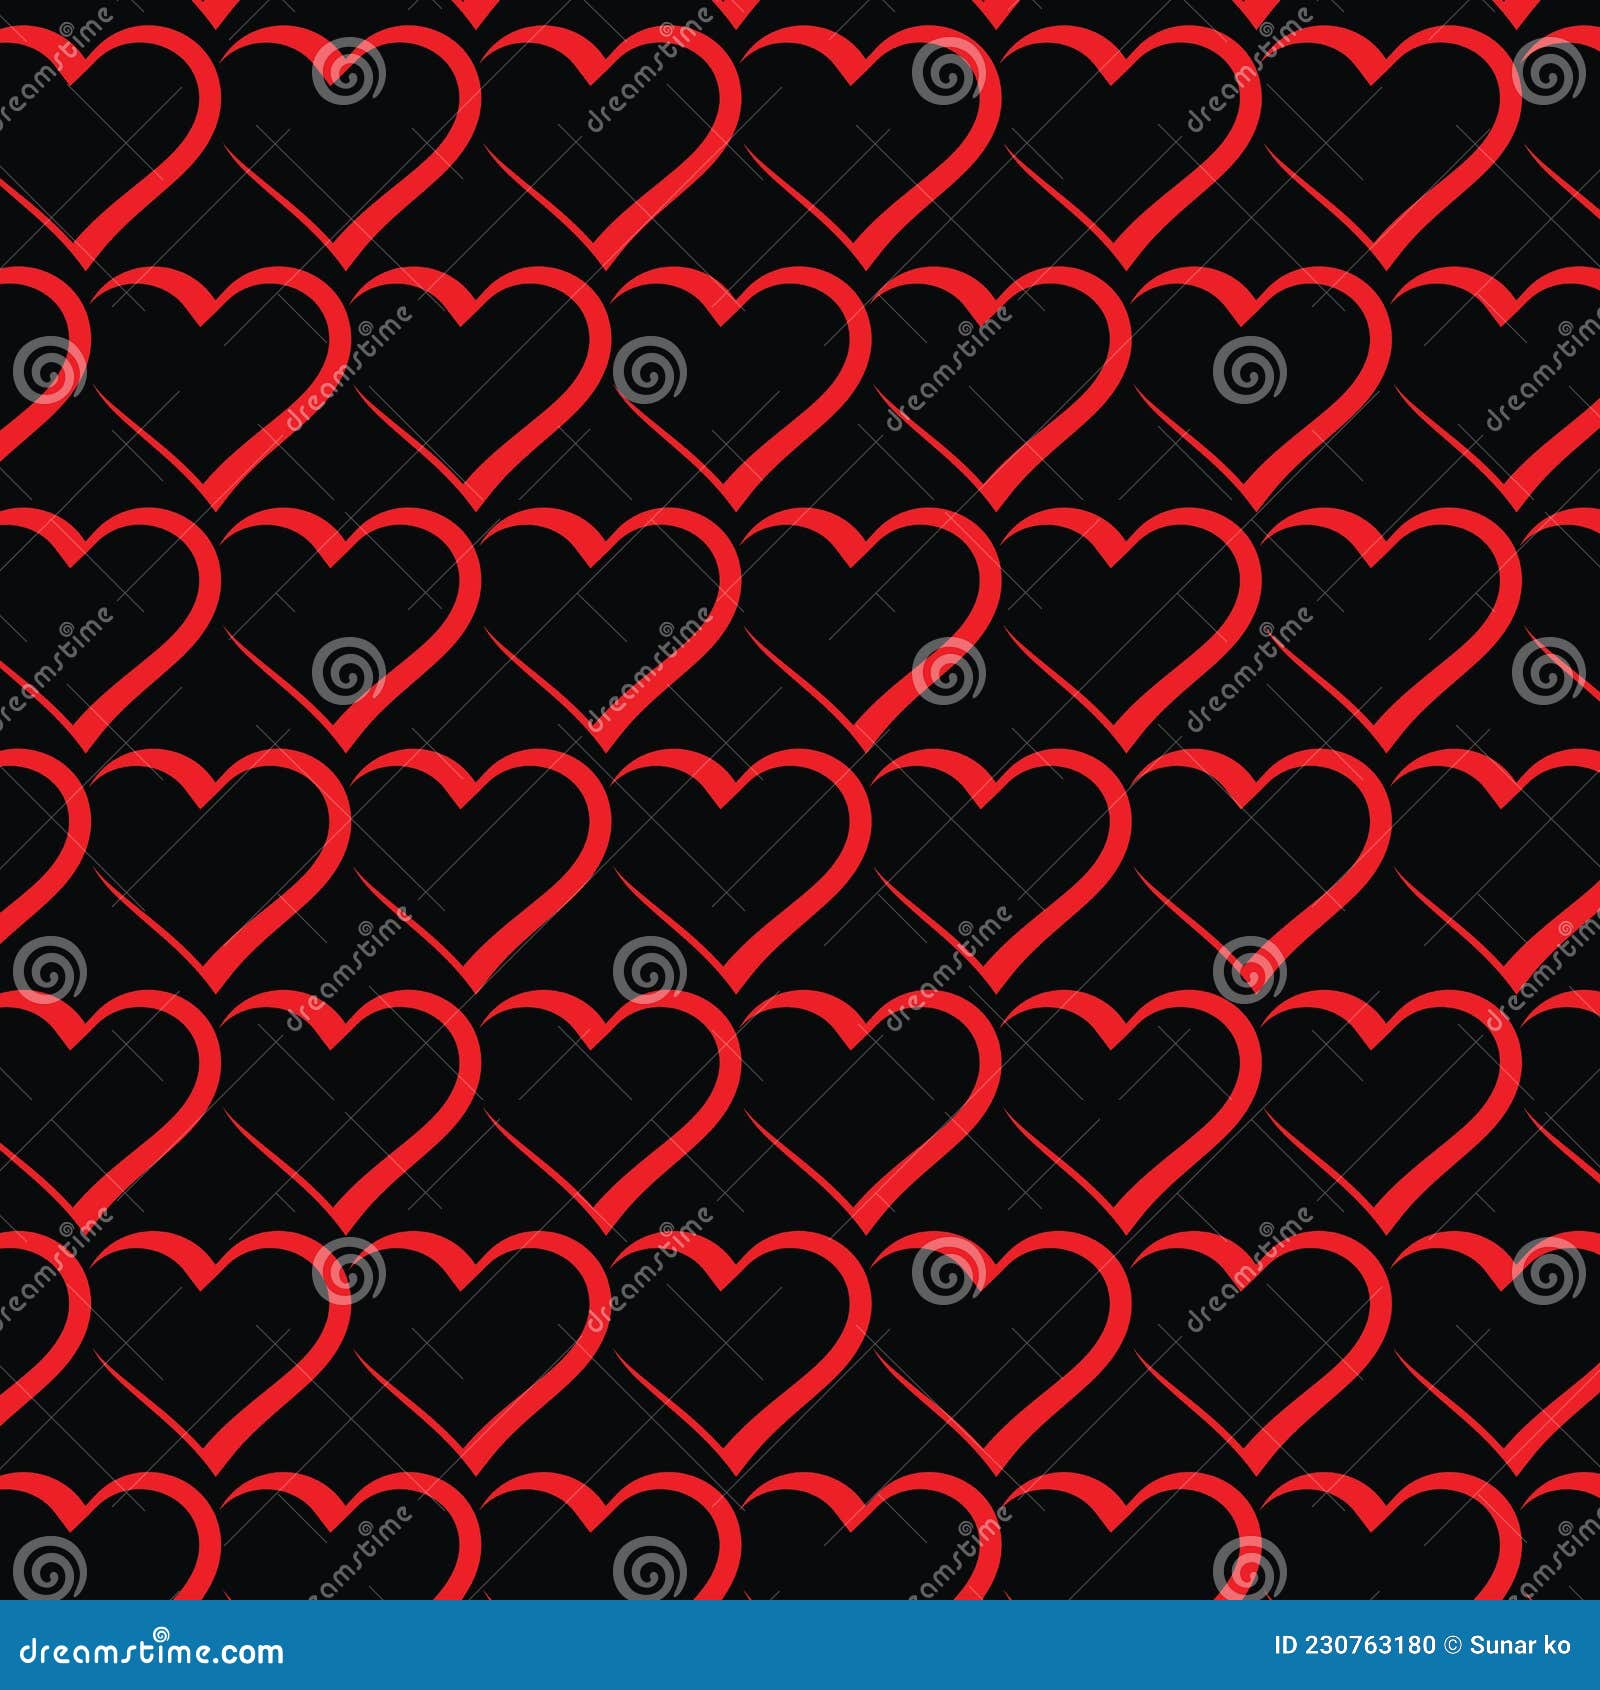 Heart Shaped Icons Vector Art & Graphics